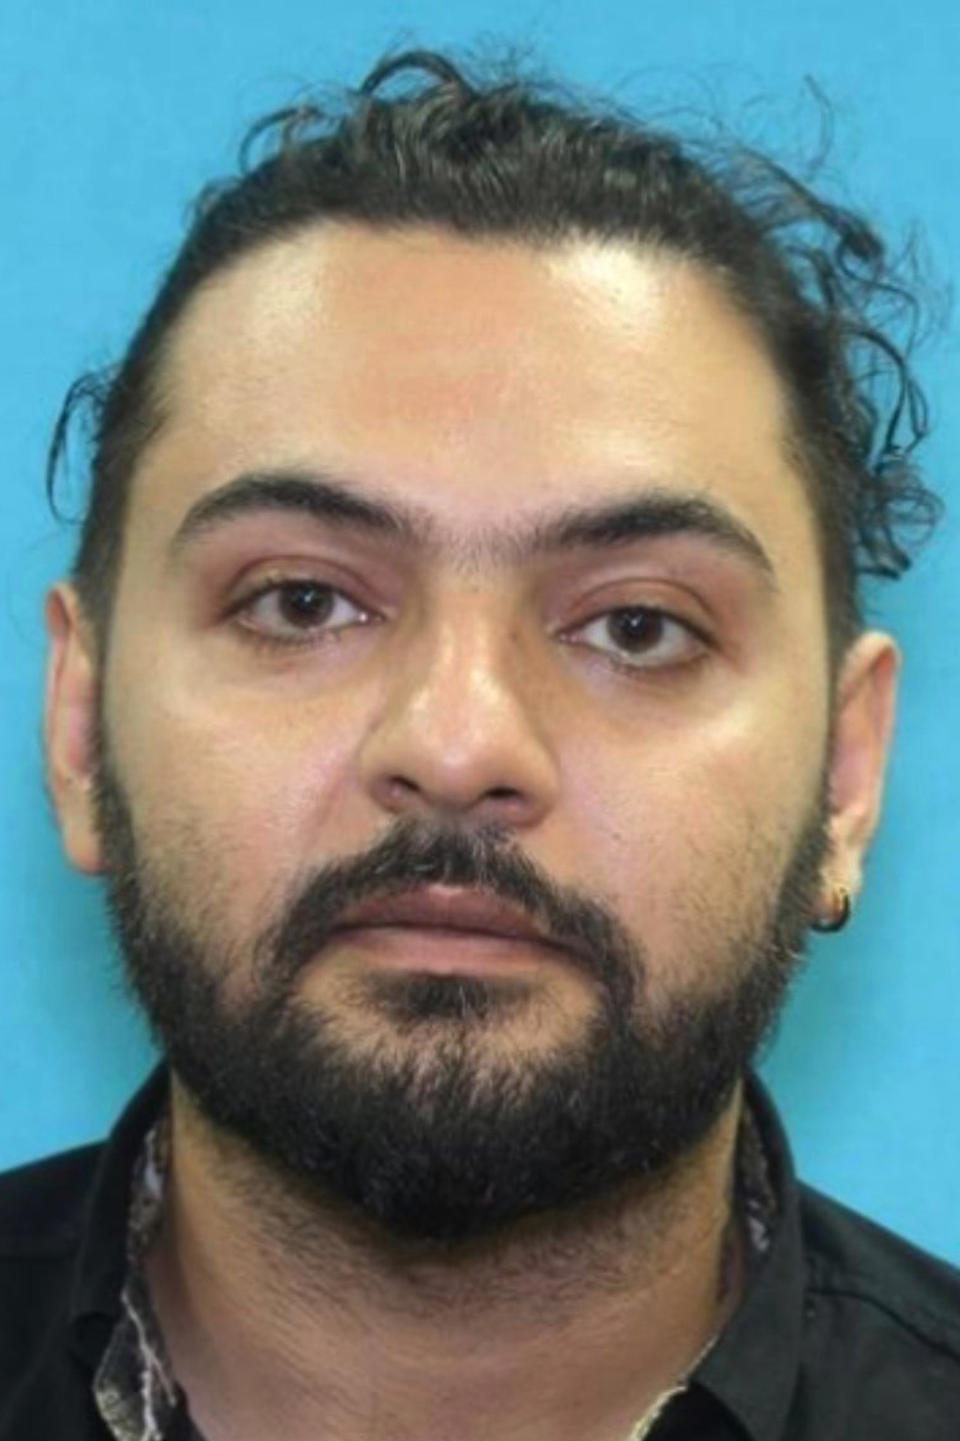 This undated photo released by the Redmond Police Department shows Ramin Khodakaramrezaei, 38. The longhaul truck driver from Texas who became obsessed with a software engineer after meeting her through a social media chatroom app killed her, her husband and himself in Redmond, Wash., after stalking them for months, police said. (Redmond Police Departemnet via AP)